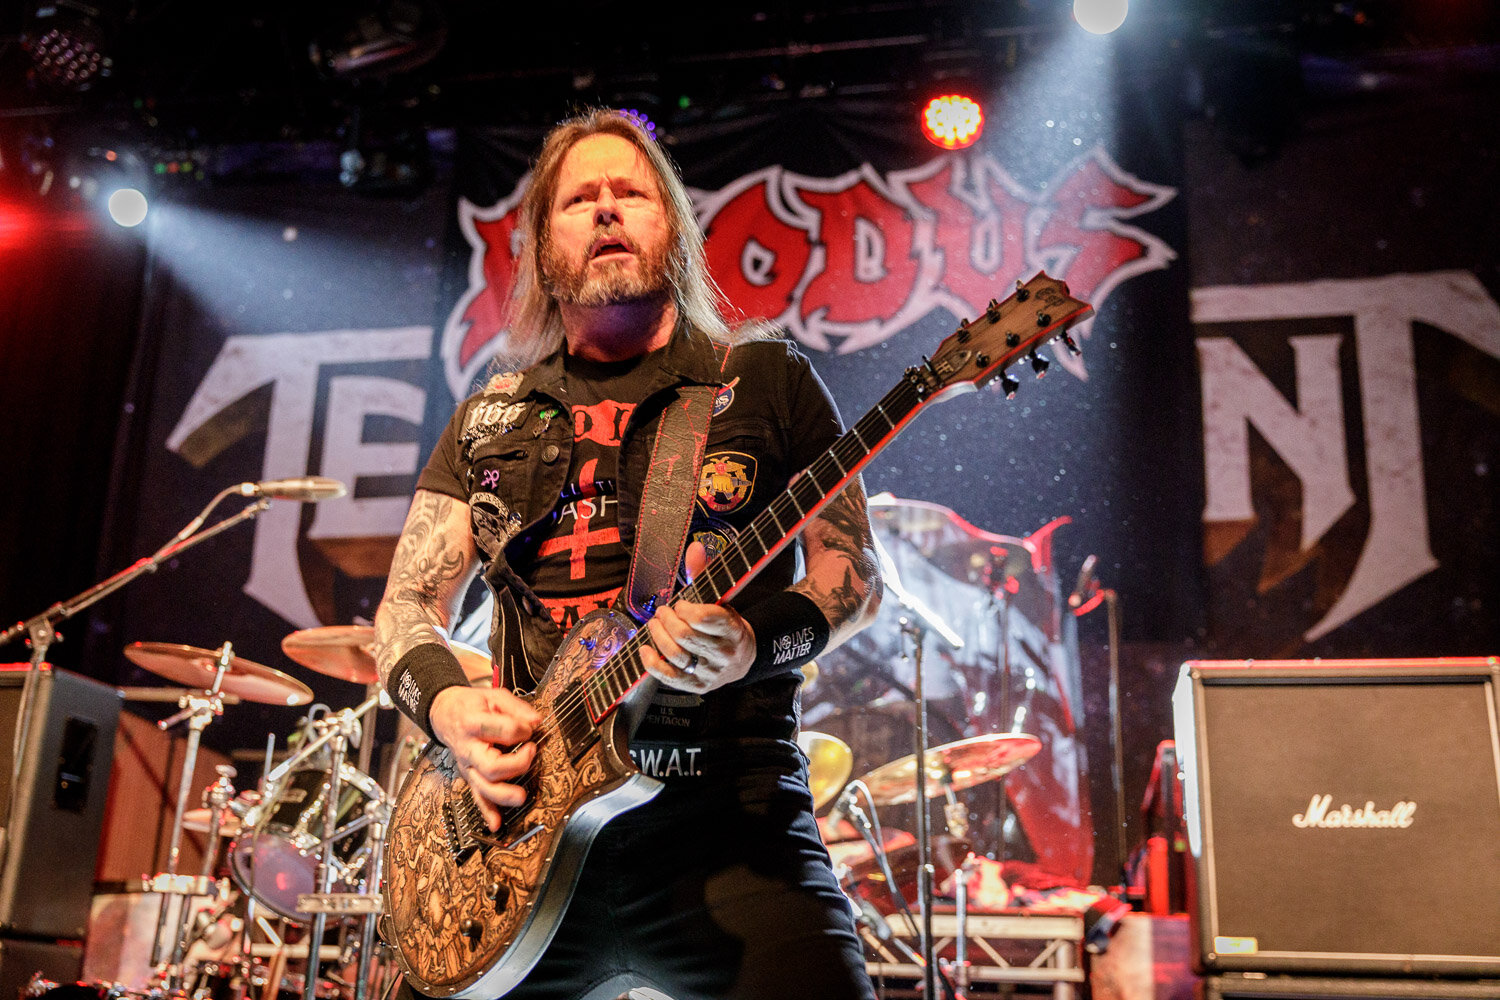 Exodus at the Manchester Academy on March 7th 2020